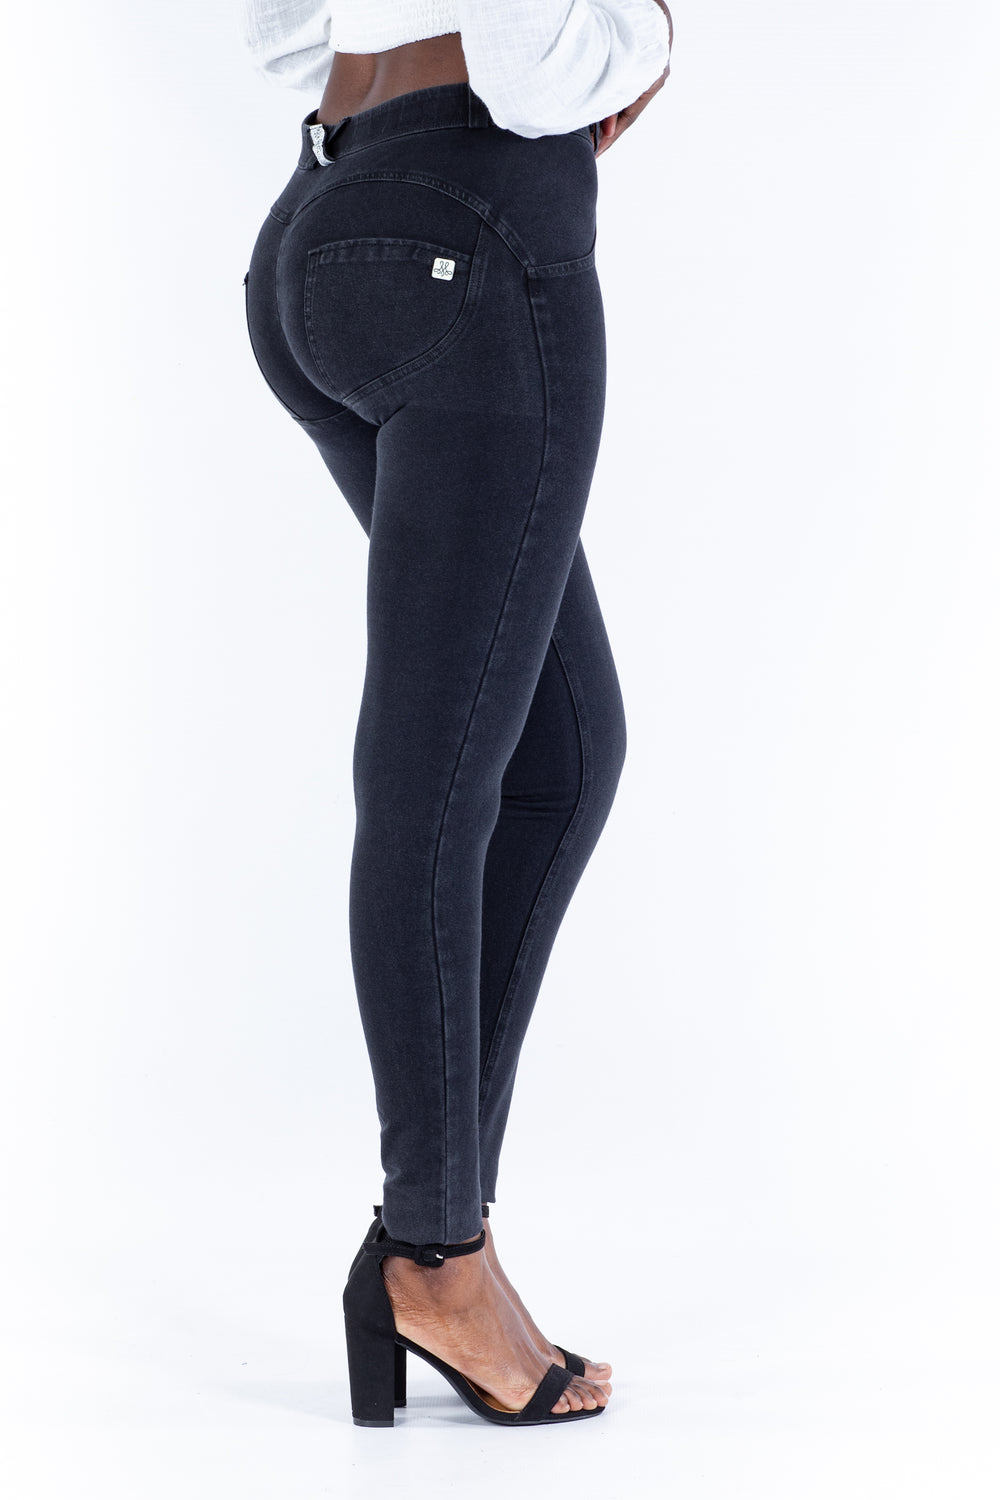 Shop new Jeans, Pants, dresses and Shapewear in South Africa – Shape Wear  Shop